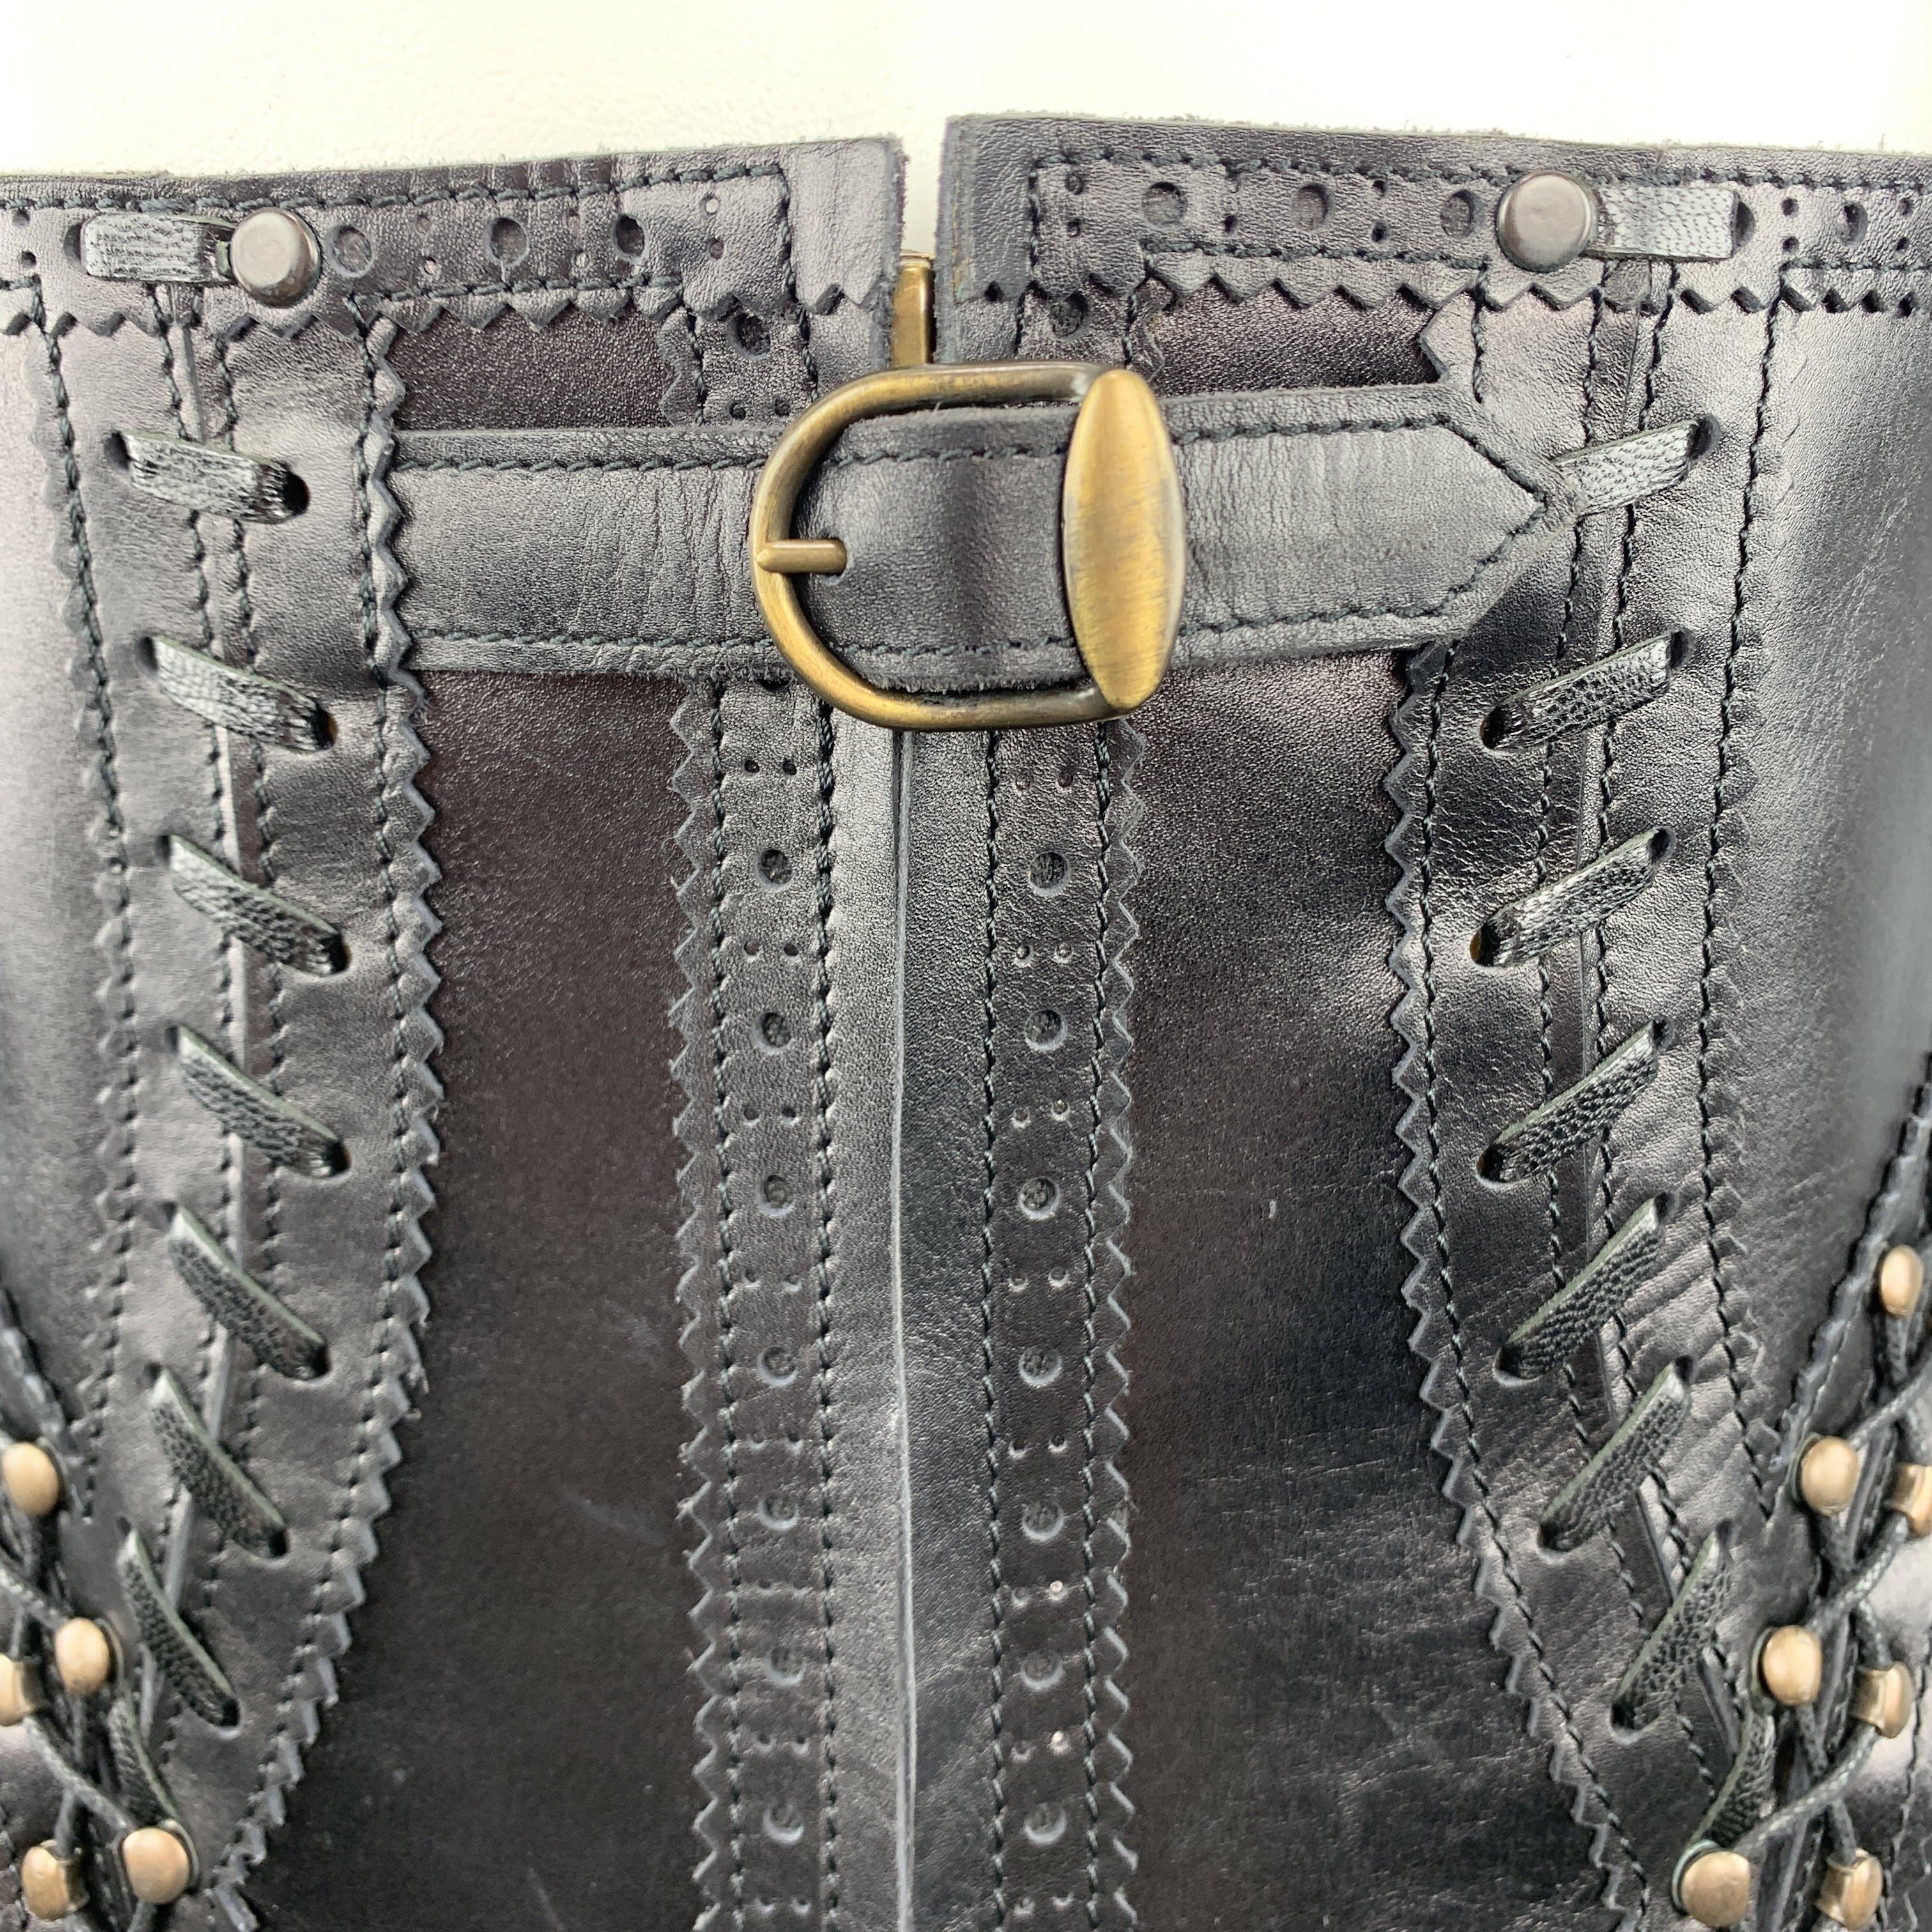 Vintage JEAN PAUL GAULTIER corset belt comes in black leather with a zip and buckle closure front, antique gold tone hardware, perforated brogue JPG sides, laced hook trim and adjustable lace up back. With dust bag.
 
Excellent Pre-Owned